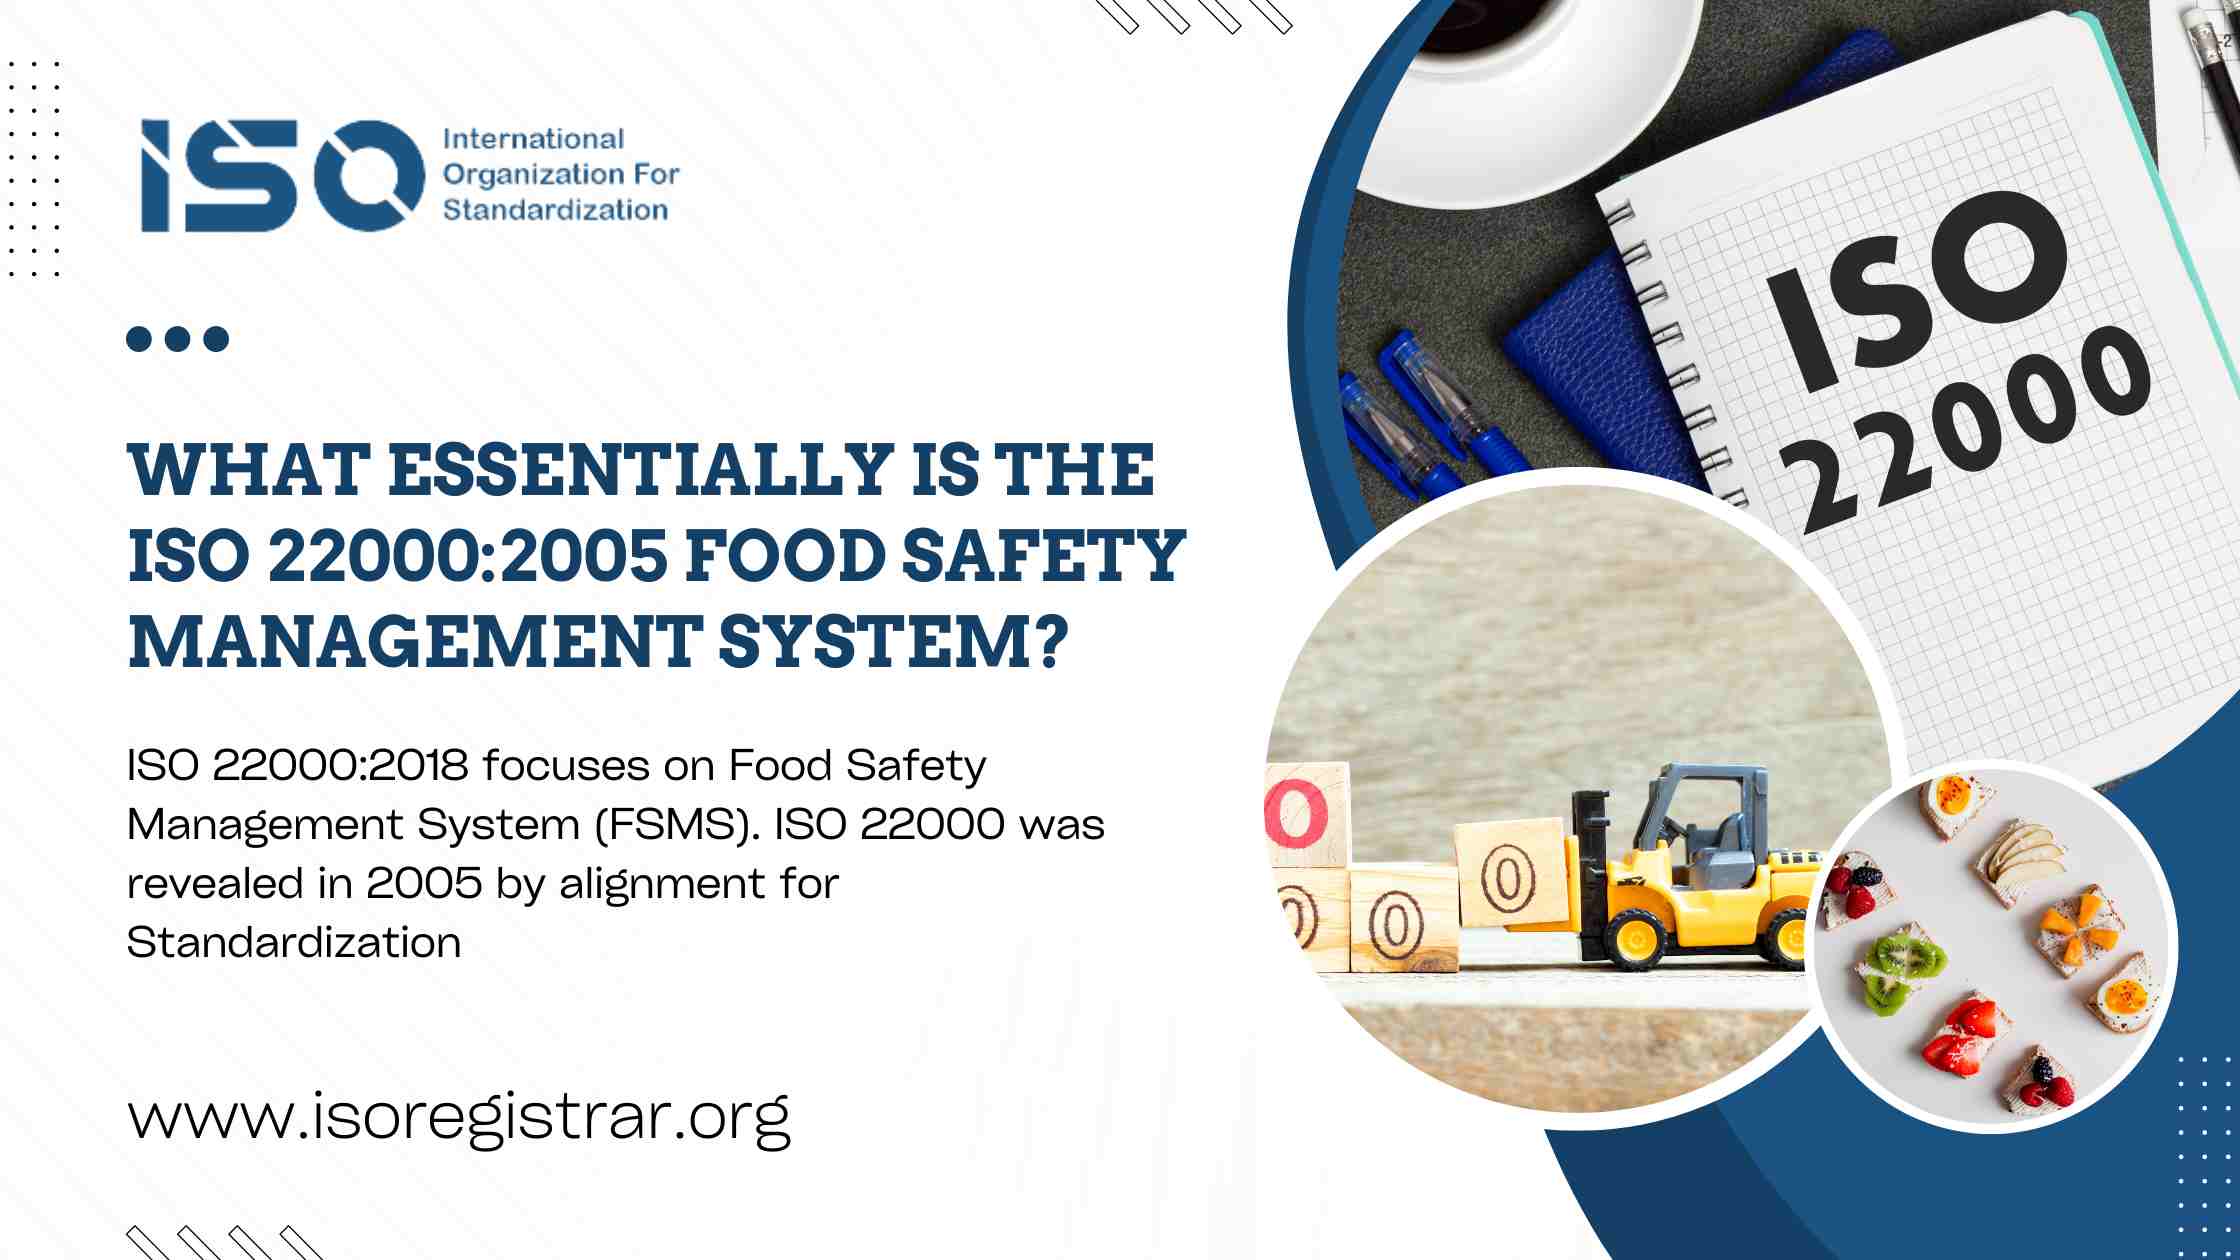 Essentially is the ISO 22000:2005 Food Safety Management System